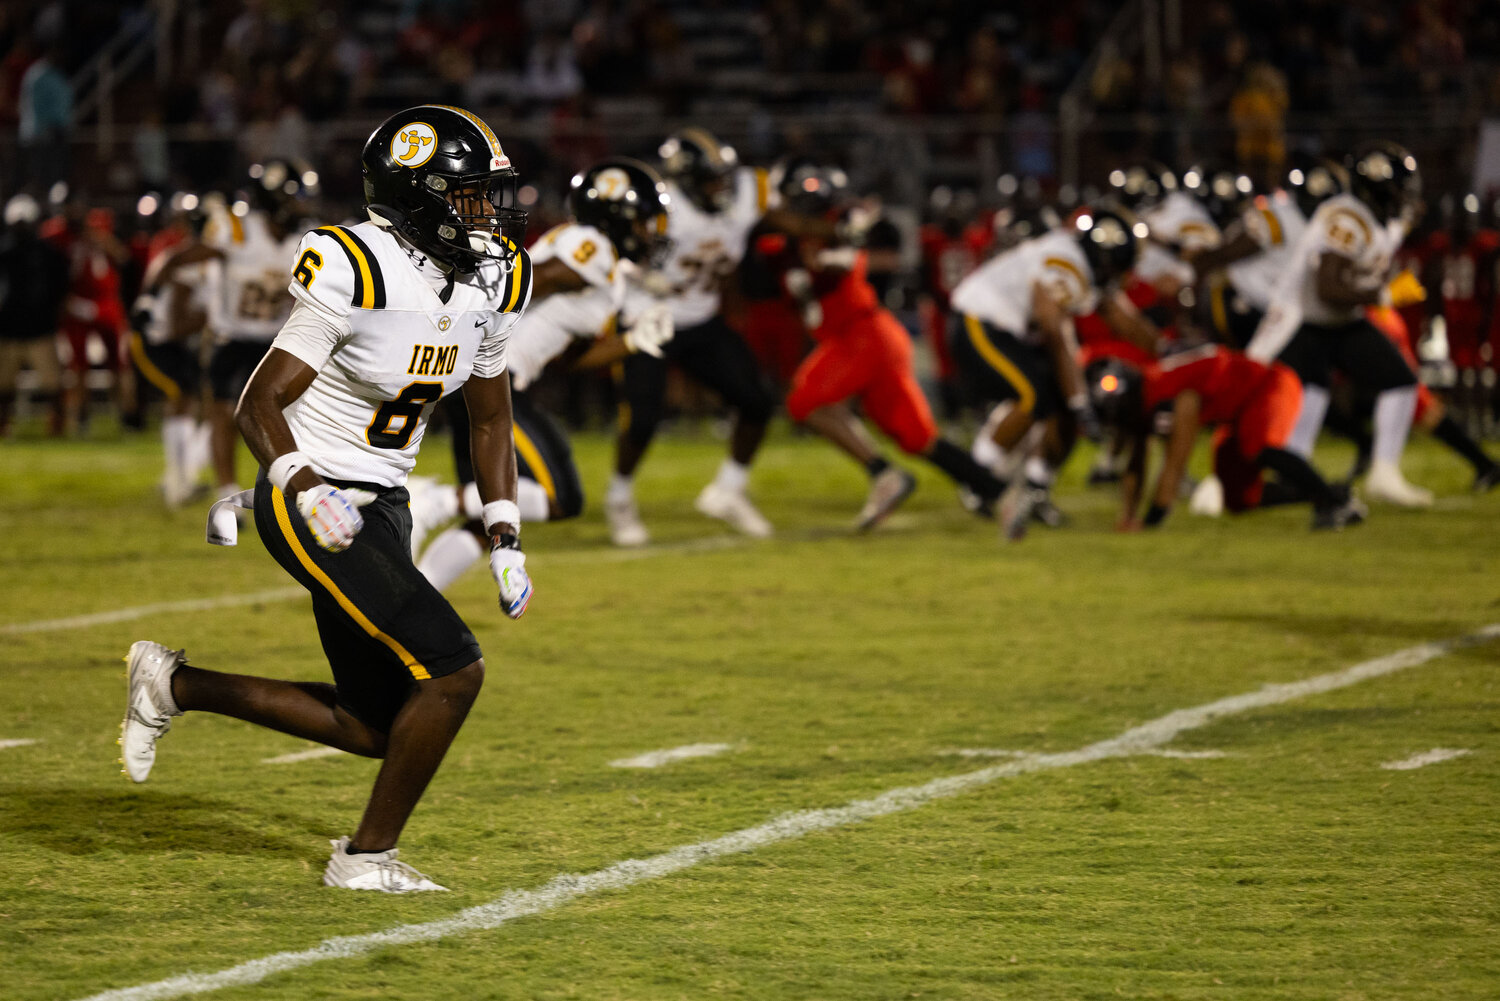 Irmo wide receiver Donovan Murph runs  route in the first quarter of their 35-21 win over Hartsville.